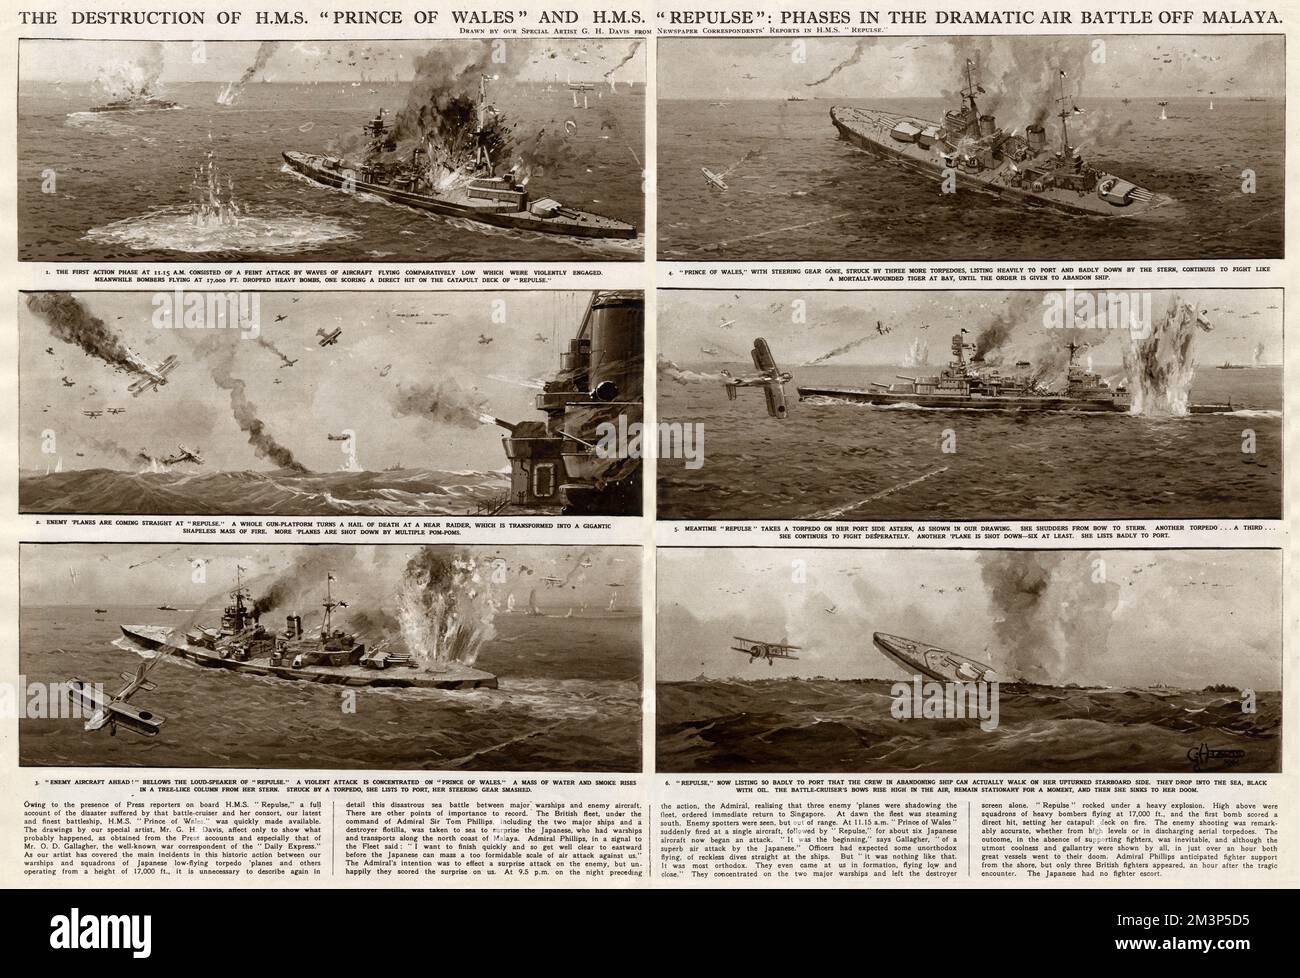 The destruction of HMS Prince of Wales and HMS Repulse: phases in the dramatic air battle off Malaya during the Second World War, when British ships were attacked by Japanese planes.       Date: 1941 Stock Photo